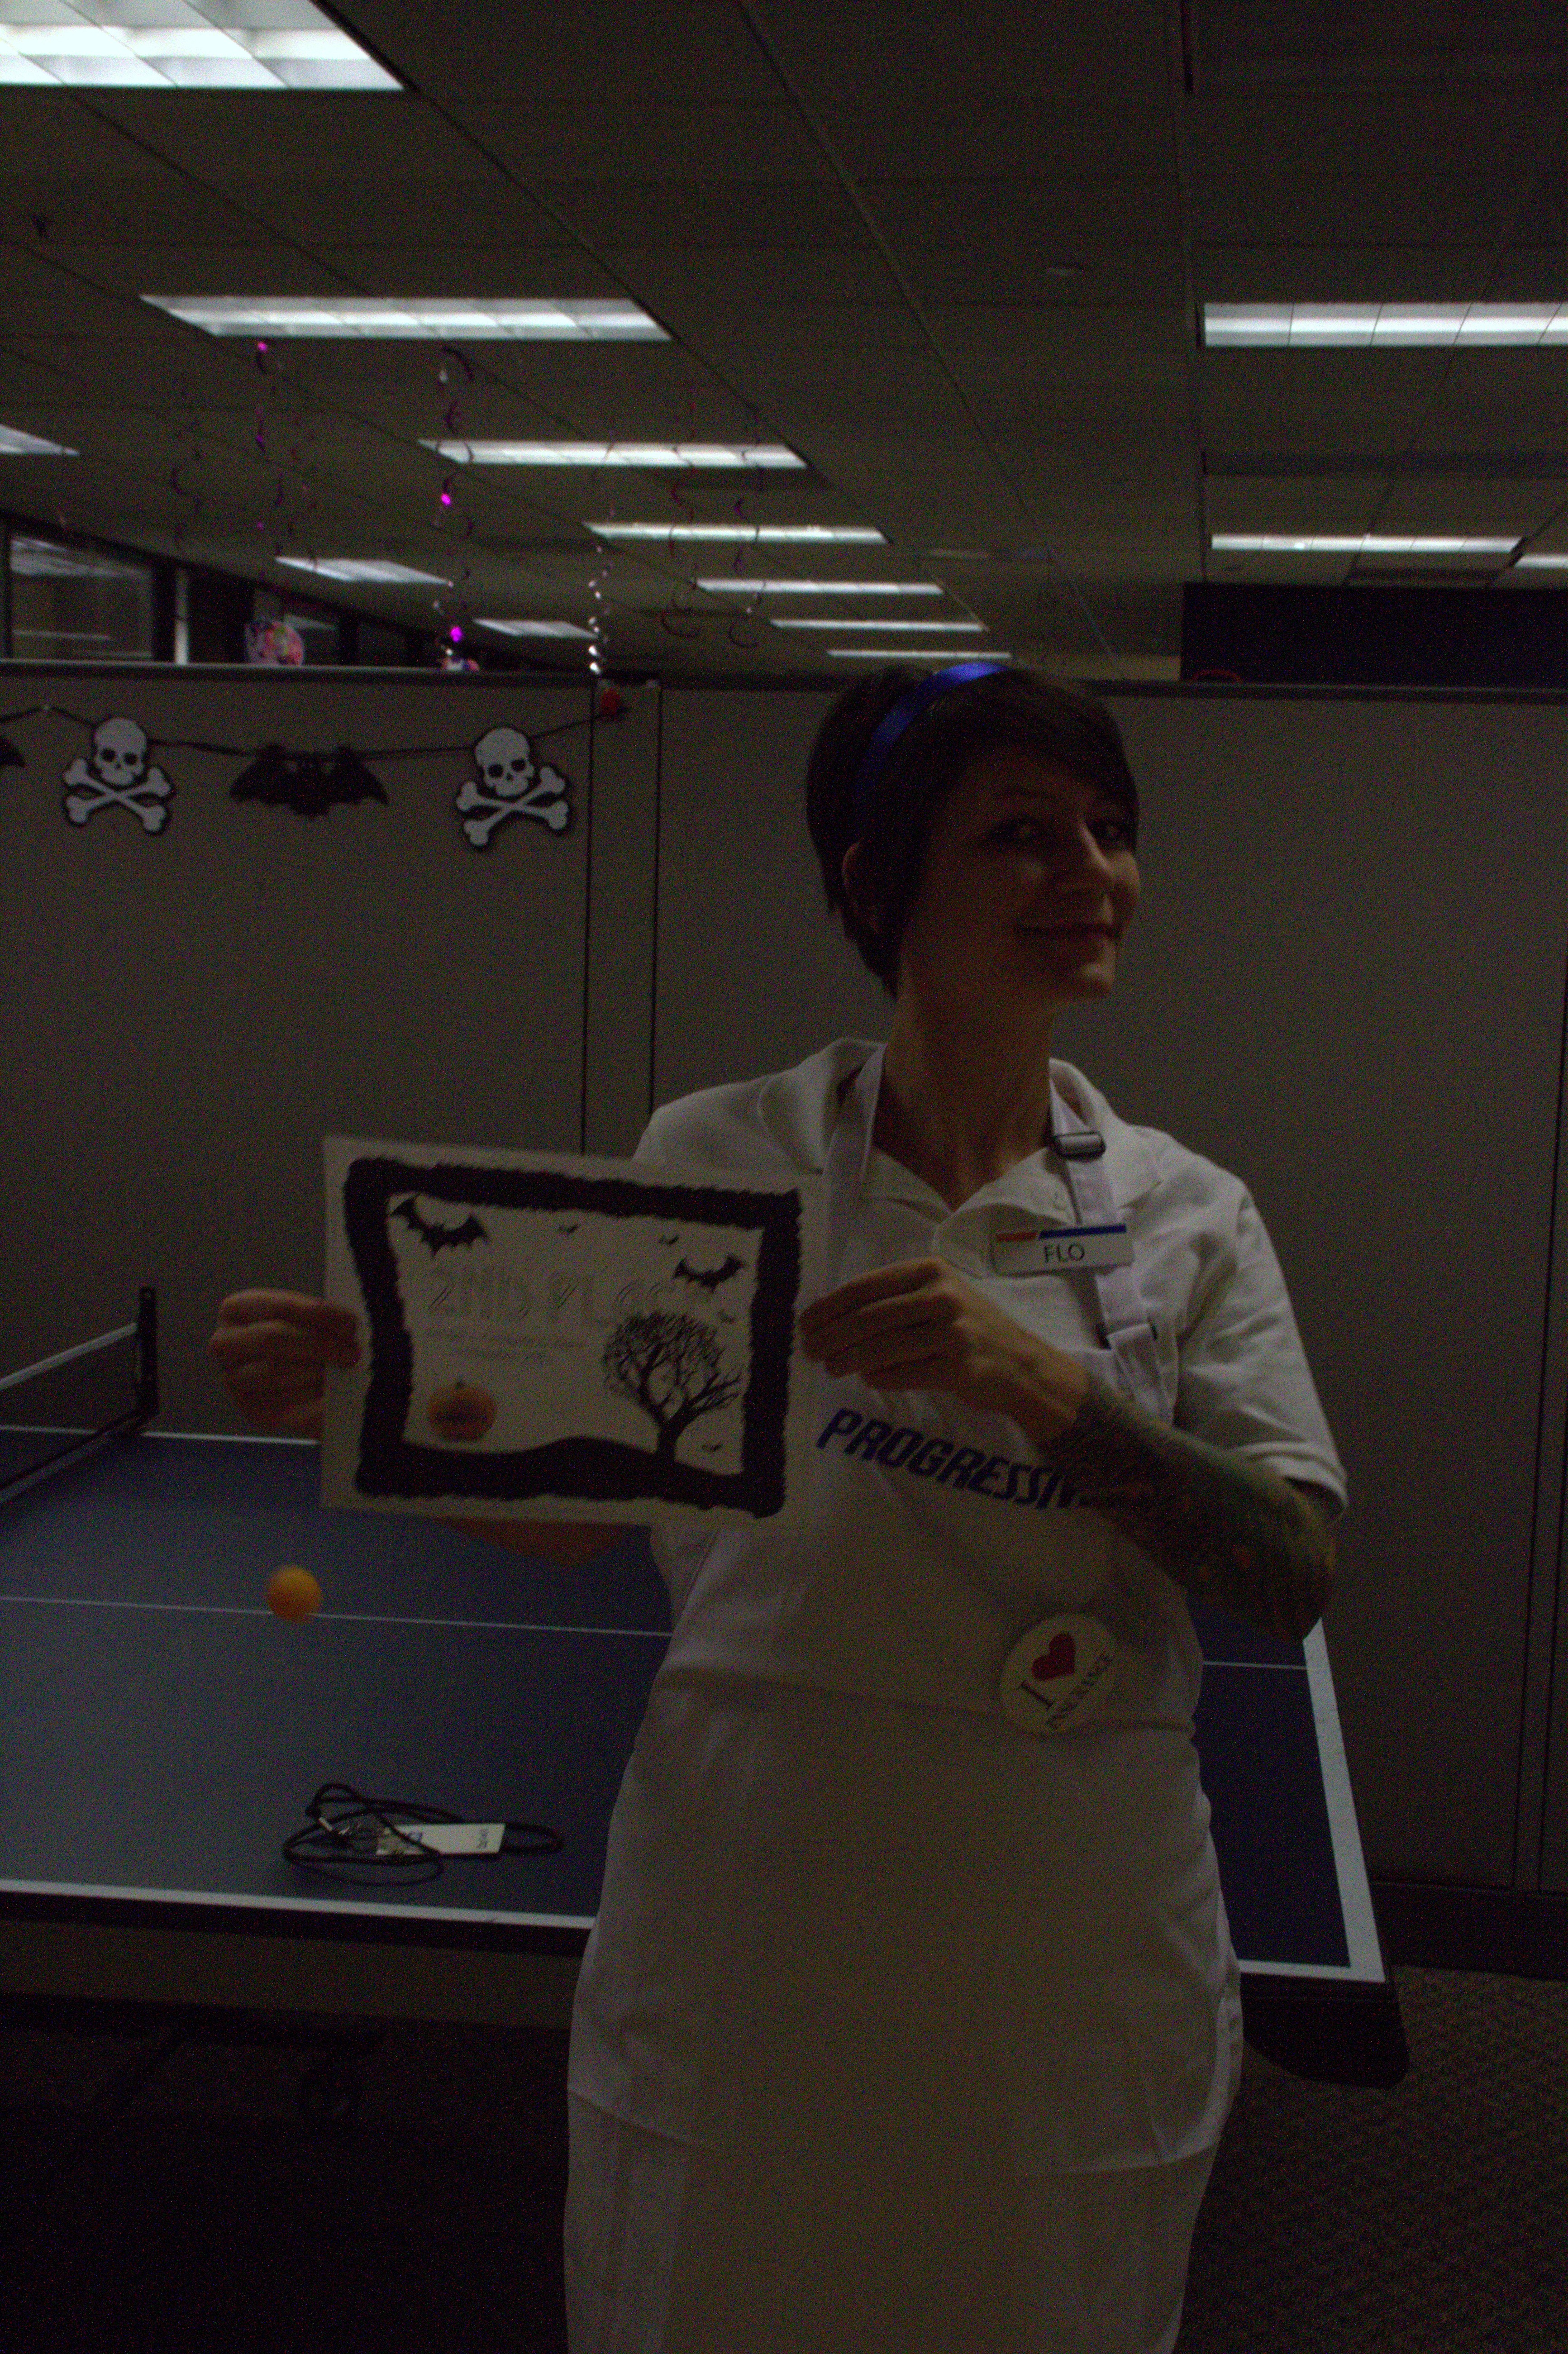 Tendenci Halloween 2013 - Flo Wins Second Place!